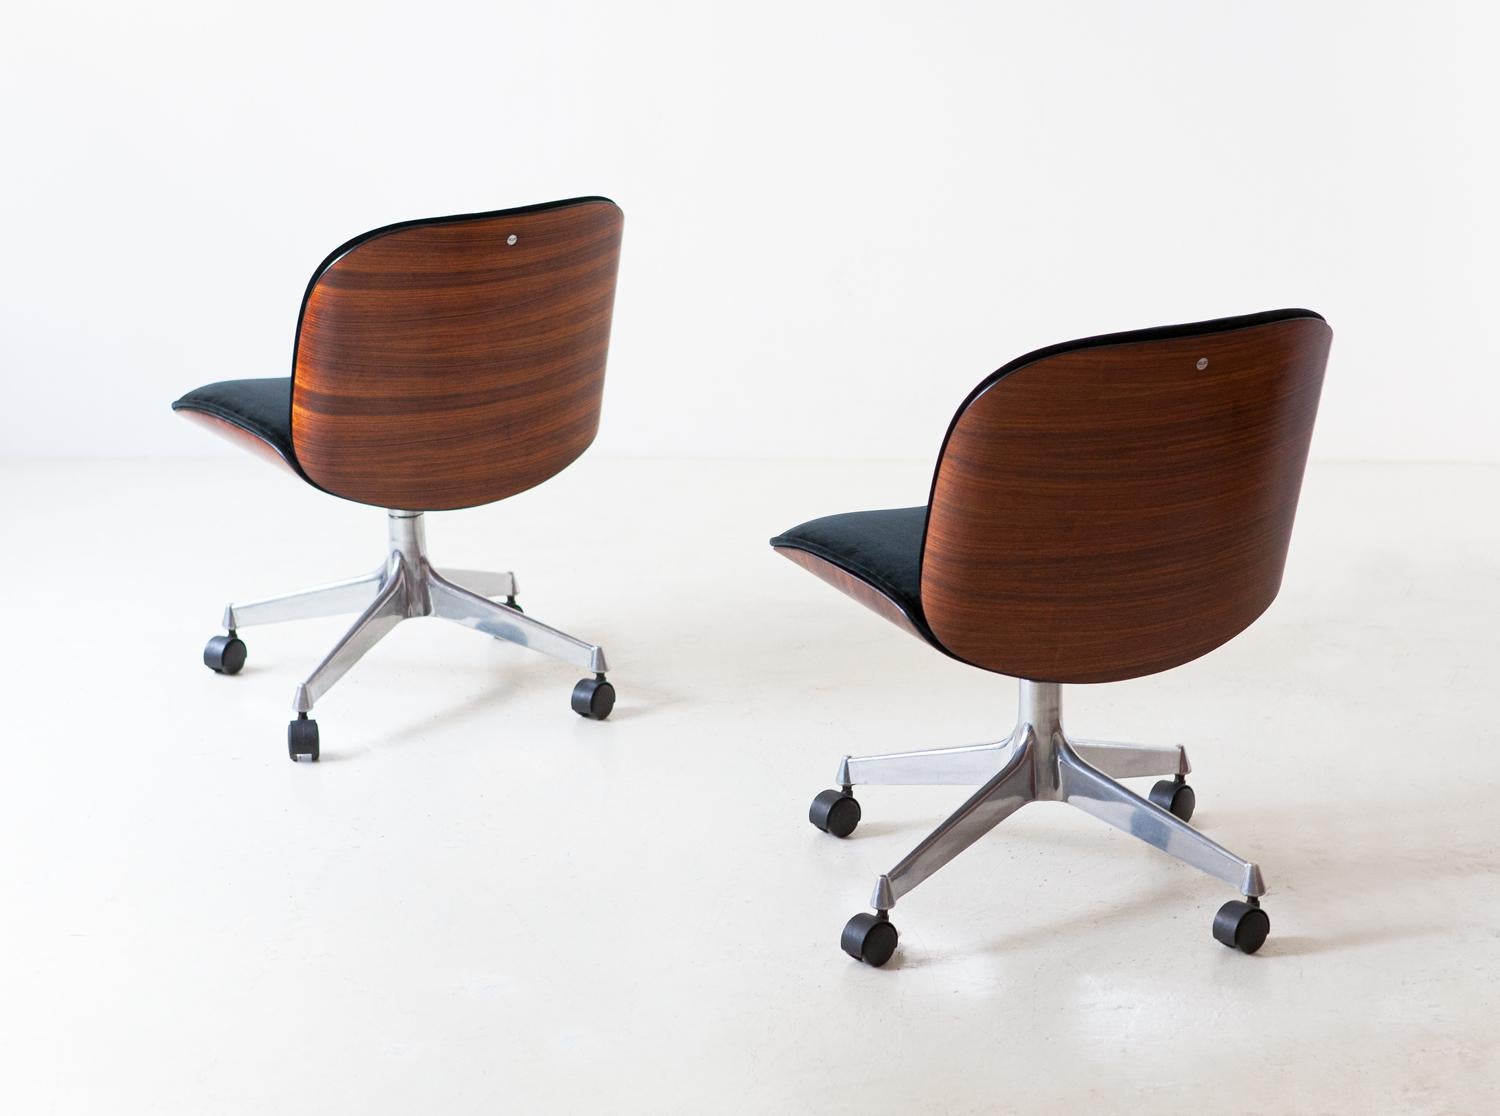 1950s Modernist swivel chairs designed by Ico Parisi and produced by M.I.M. (Mobili Italiani Moderni) Roma, Italy


Fully restored curved rosewood frame with a deep sanding of the original finishing, then a light hand of natural shellac. 
Metal